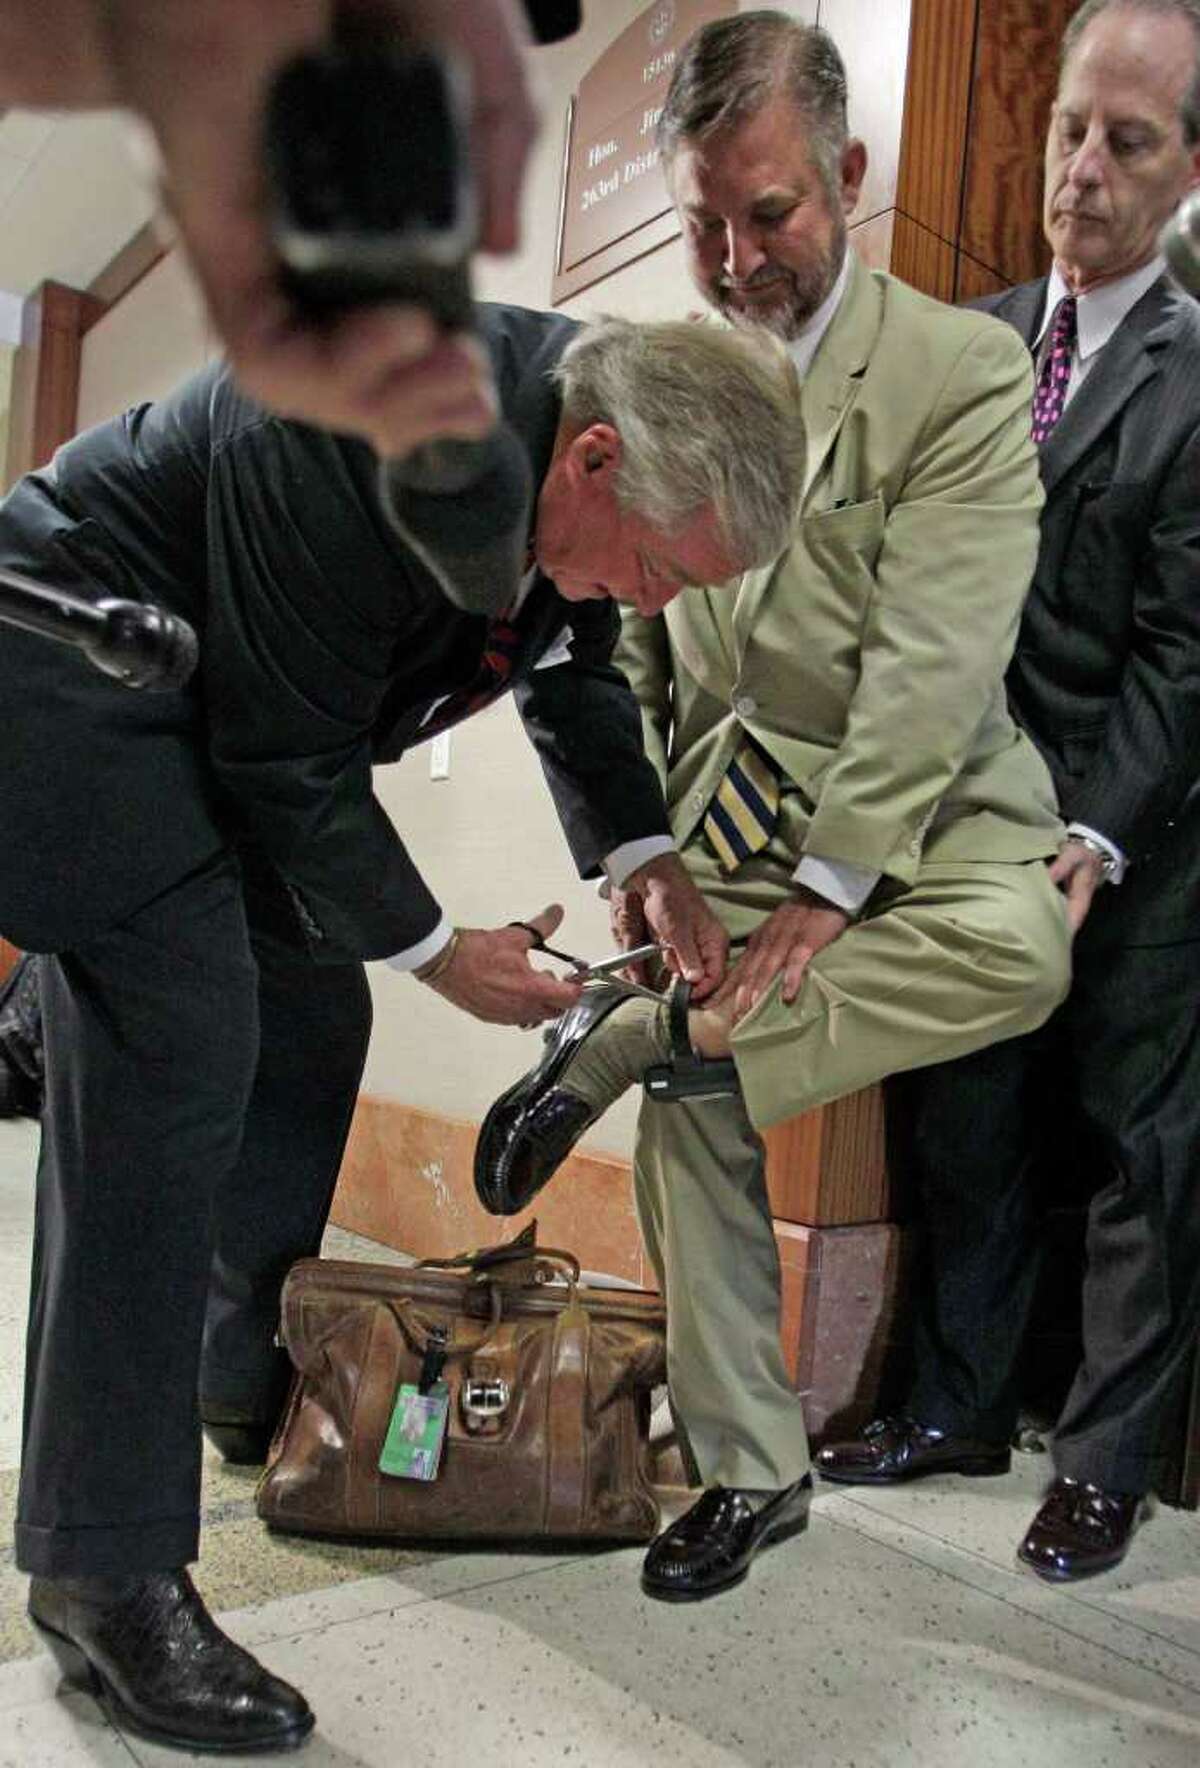 MELISSA PHILLIP : CHRONICLE CLEARED: Defense attorney Dick DeGuerin cuts the monitoring device from the ankle of his client, Michael Brown, after the verdict. Defense attorney Brian Wice steadies Brown.